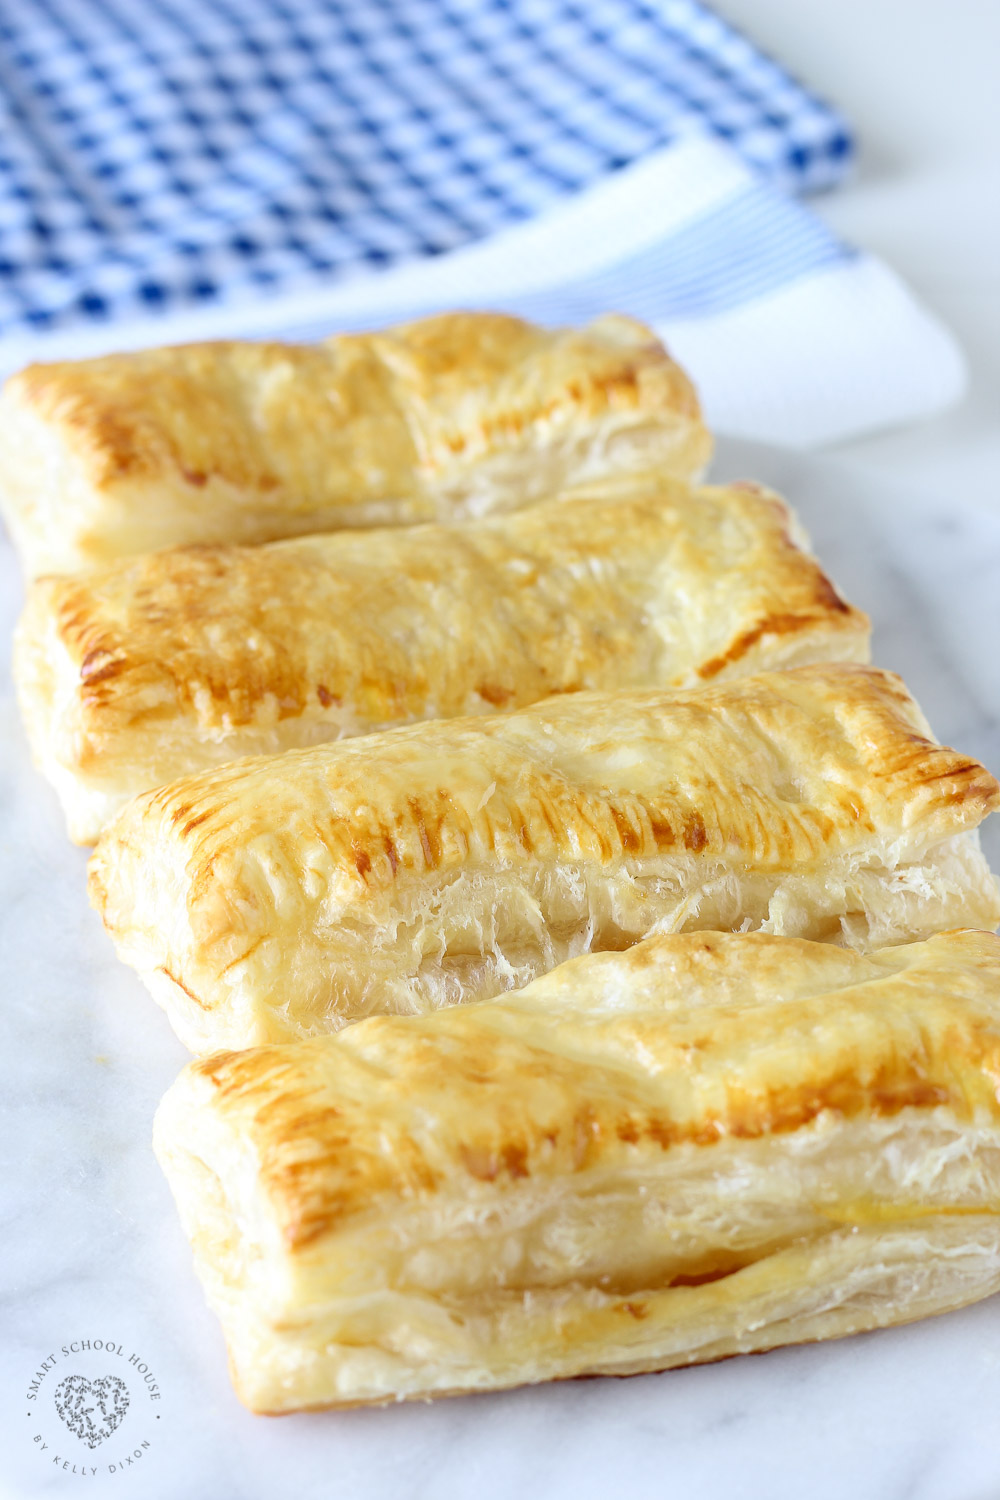 Our Peach Puff Pastry recipe with an irresistible homemade glaze is delicious and so quick & easy to make! It's made using peaches and puff pastry sheets.